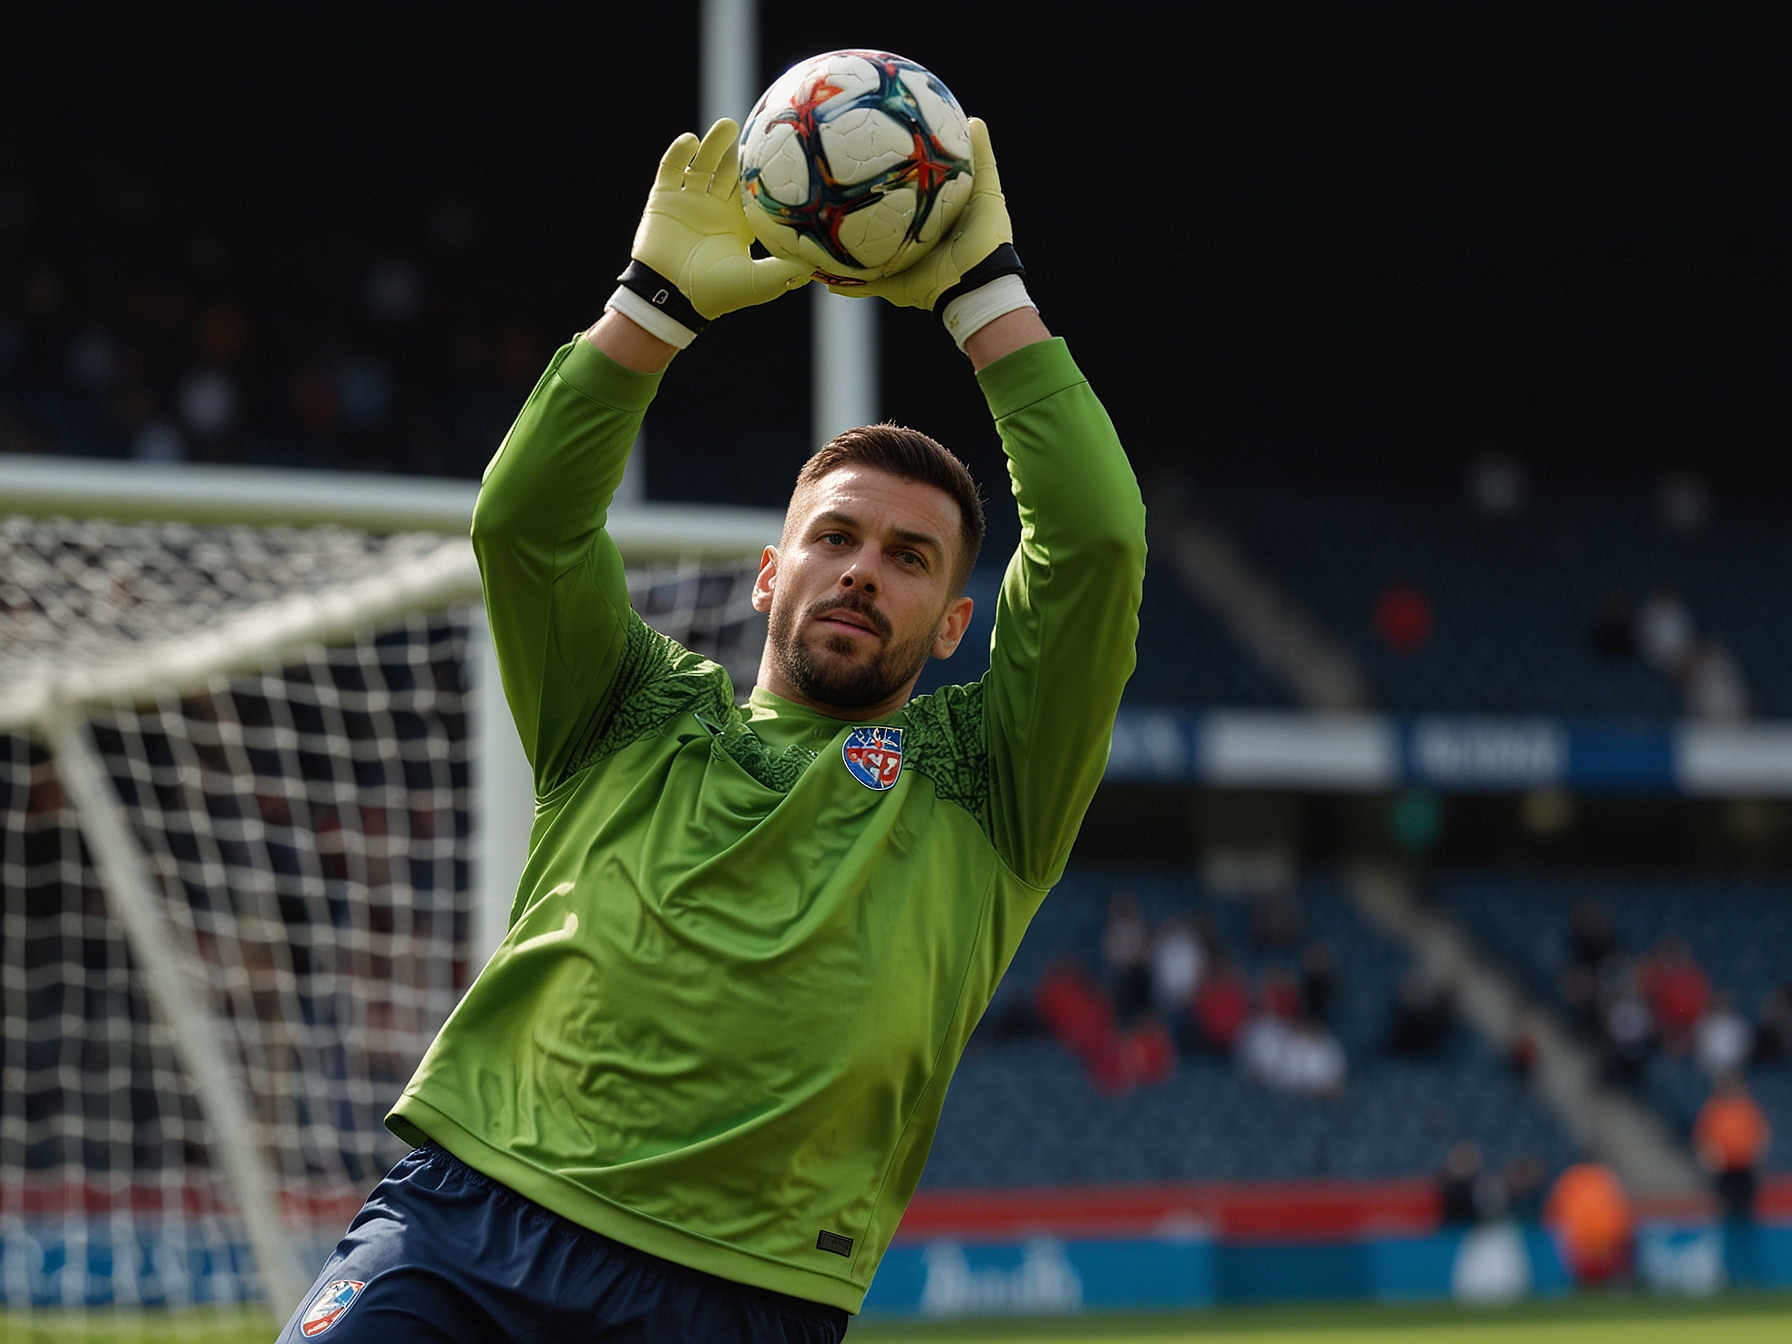 Slovak goalkeeper Martin Dúbravka making a spectacular save during training, showcasing his crucial role in Slovakia's defensive strategy for the upcoming Euro 2024 match.